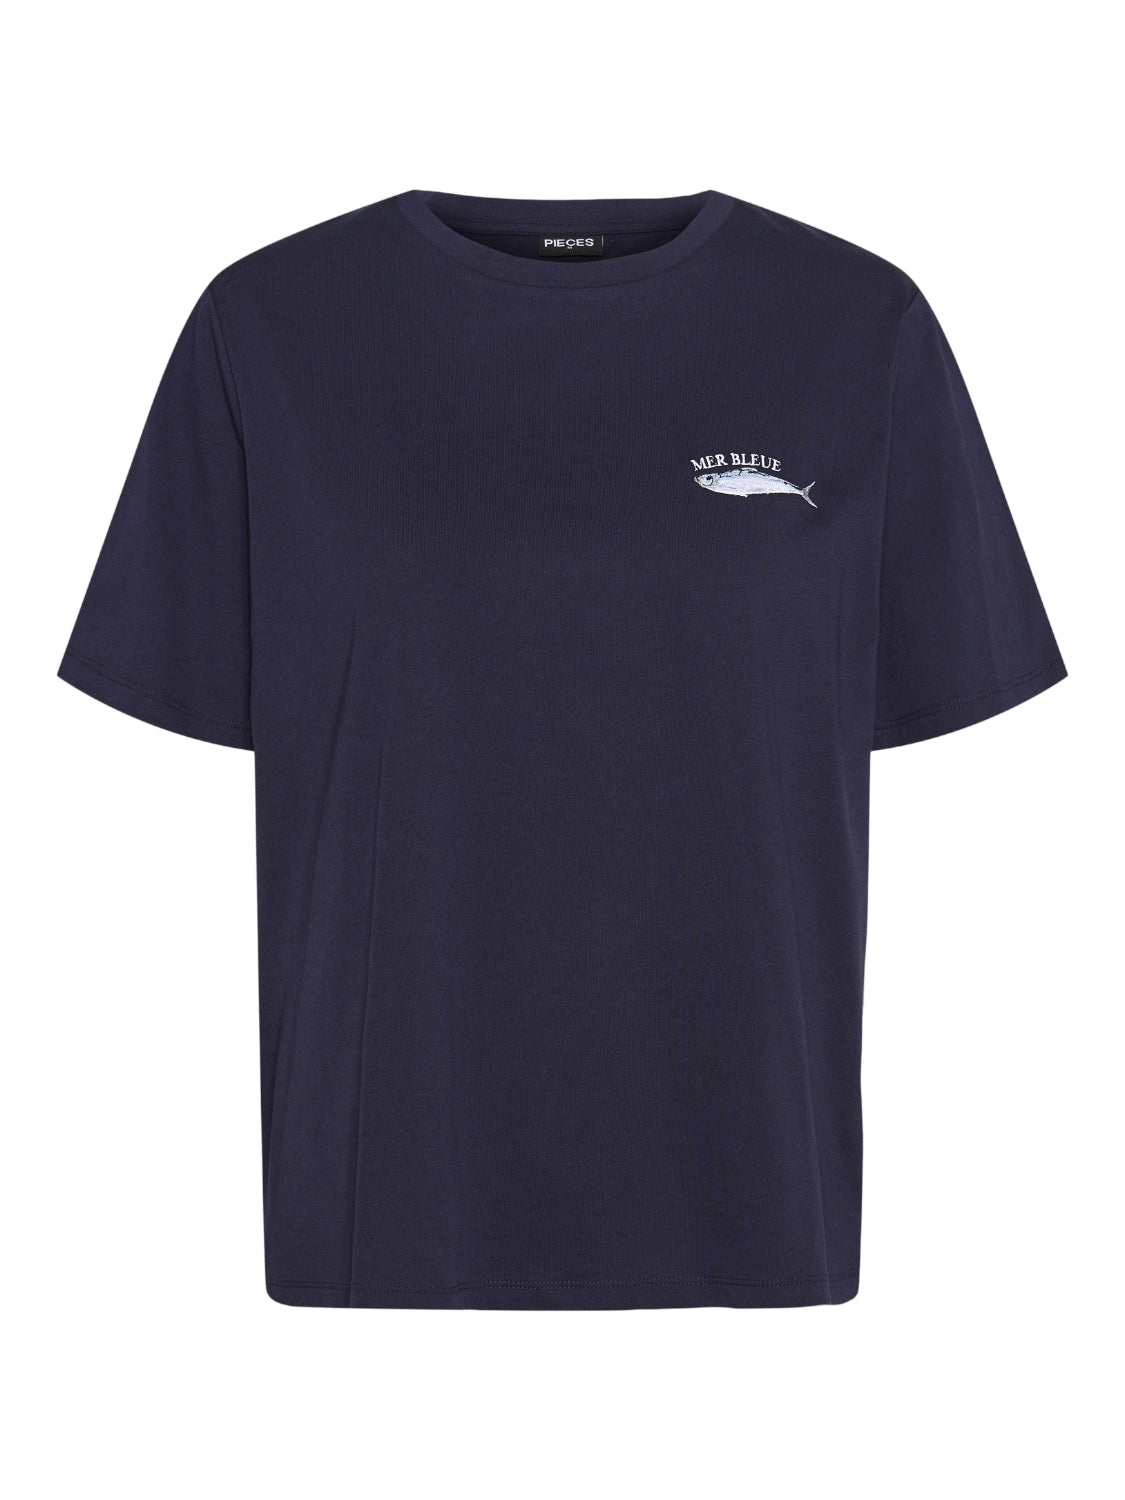 Pieces Embroidered Mackerel T-Shirt in Navy